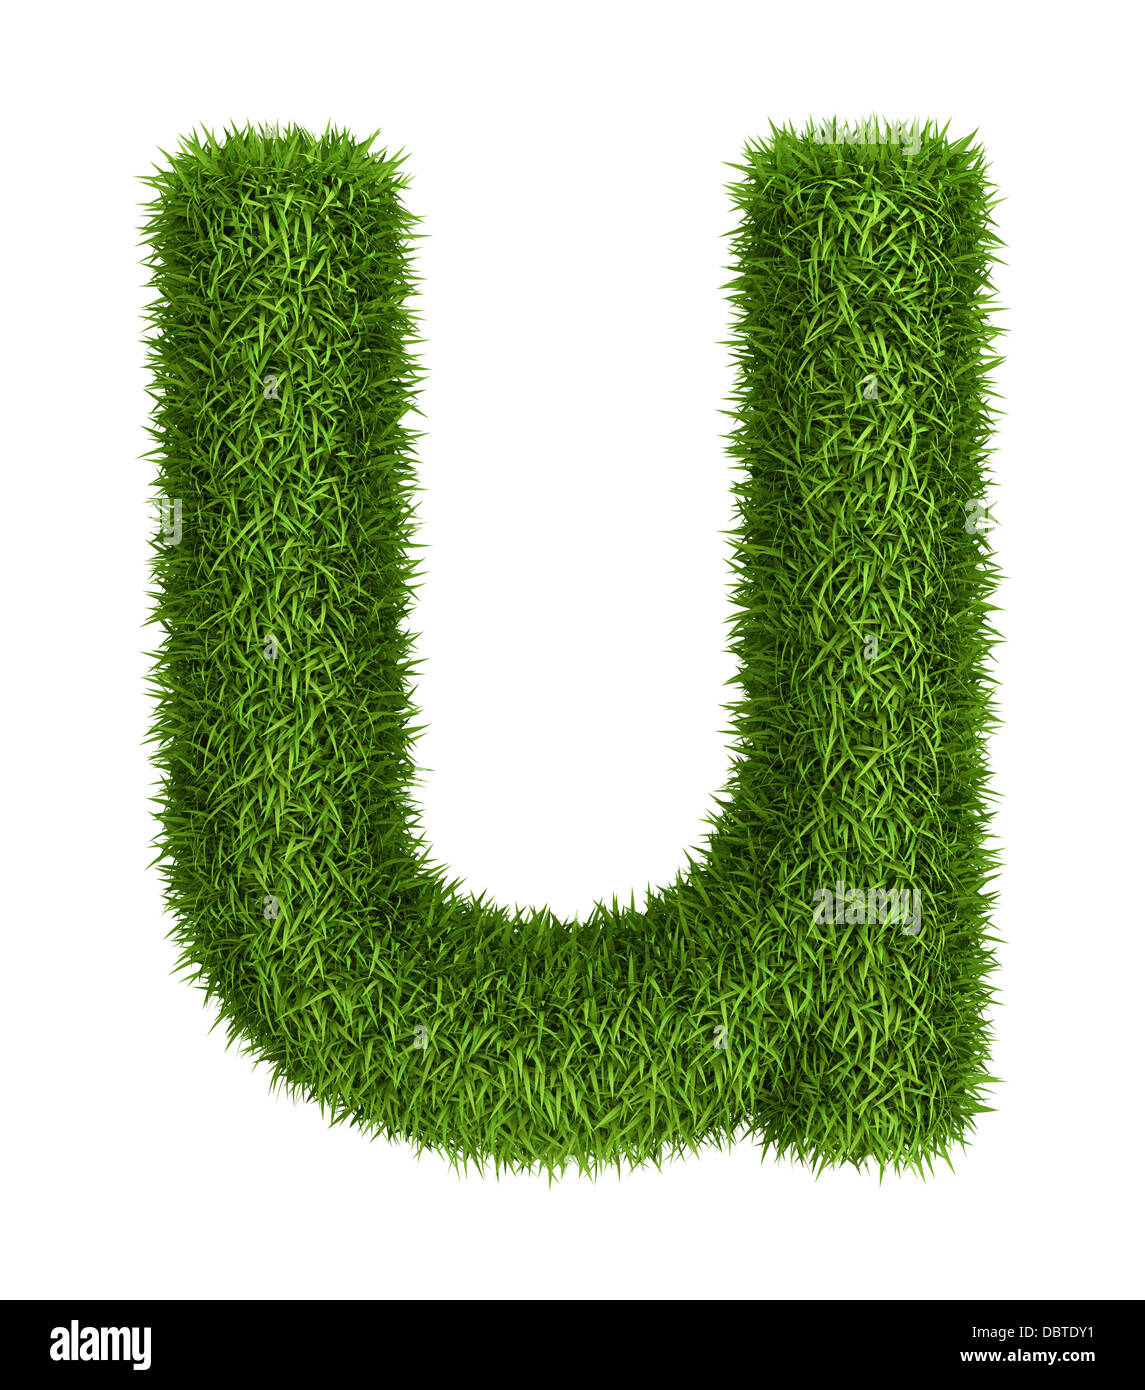 Natural grass letter u lowercase Stock Photo